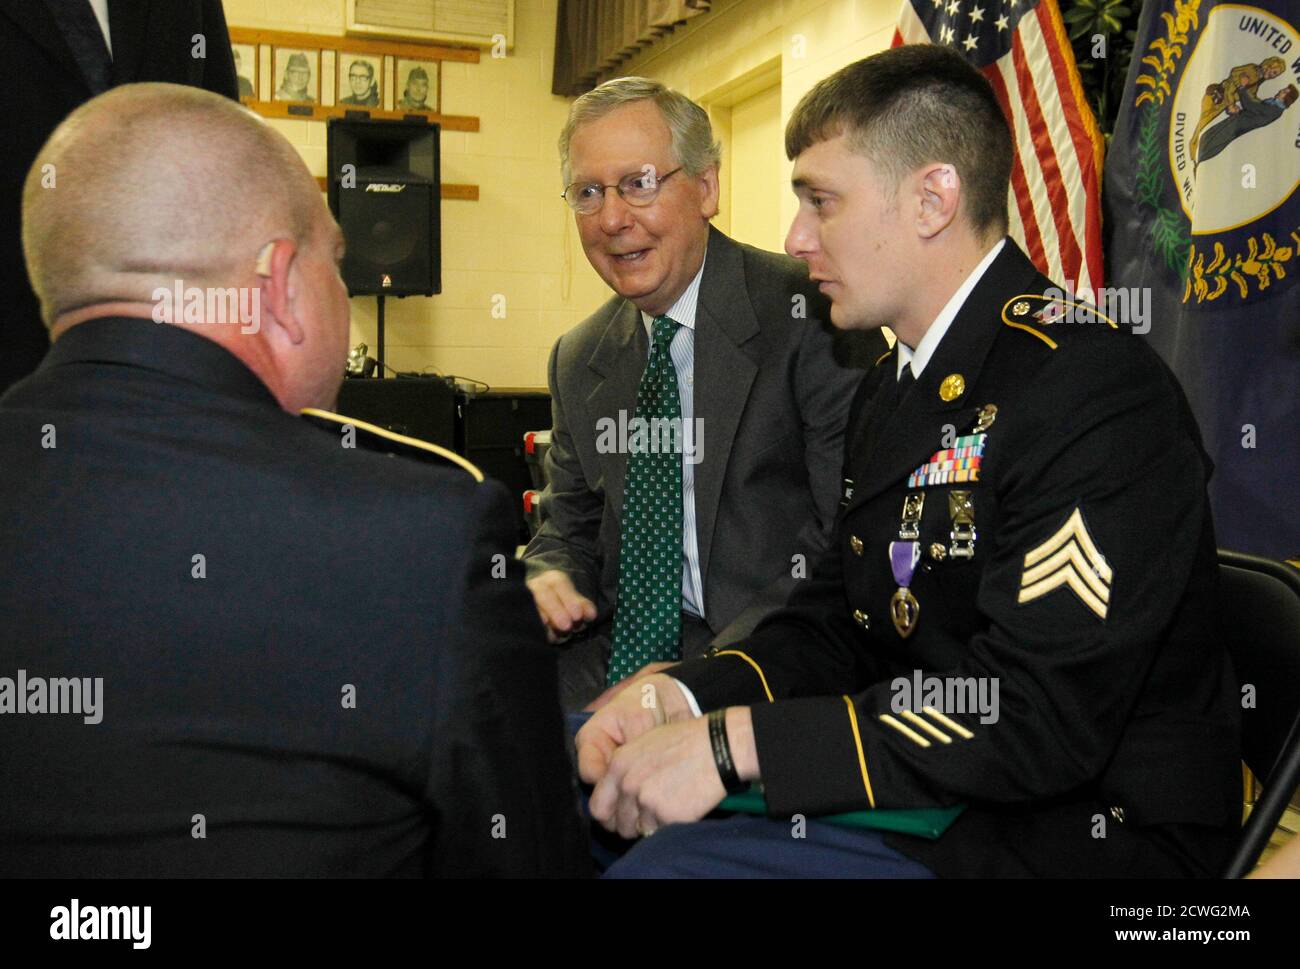 Senator Mitch McConnell (R-KY), (C), talks with Kentucky National Guard Sgt. Jesse Wethington (R) before presenting him with a Purple Heart at the VFW Post 1170 in Louisville, Kentucky, April 5, 2014. In their bid to unseat 'establishment' Republican incumbent senators this year the top priority for many in the conservative Tea Party movement is McConnell in Kentucky, but they face a tough campaigner who has been preparing to fend off a primary challenge since 2010.  Picture taken April 5, 2014.   REUTERS/John Sommers II  (UNITED STATES - Tags: POLITICS ELECTIONS) Stock Photo